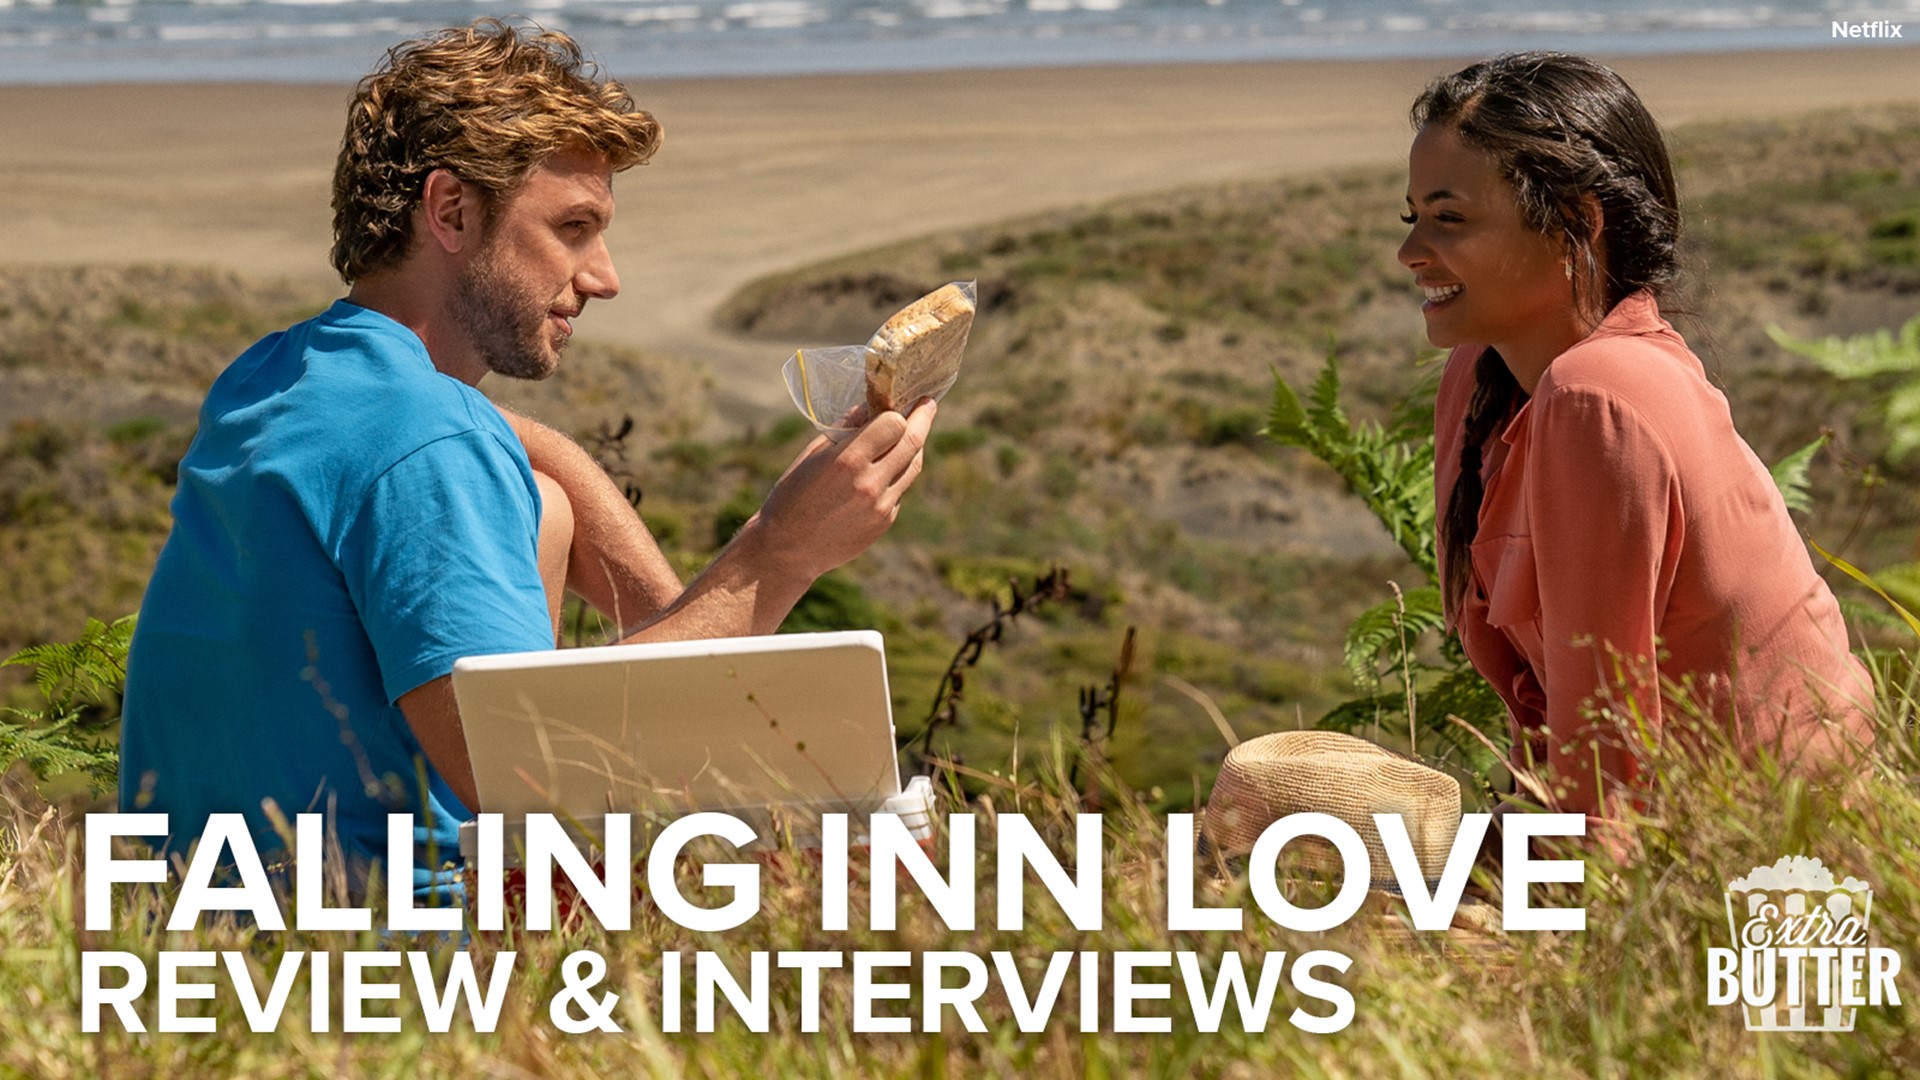 Fans are falling in love with the chemistry between Christina Milian and Adam Demos in the Netflix rom-com ‘Falling Inn Love.’ Extra Butter reviews the film and talks with the two stars about that chemistry.